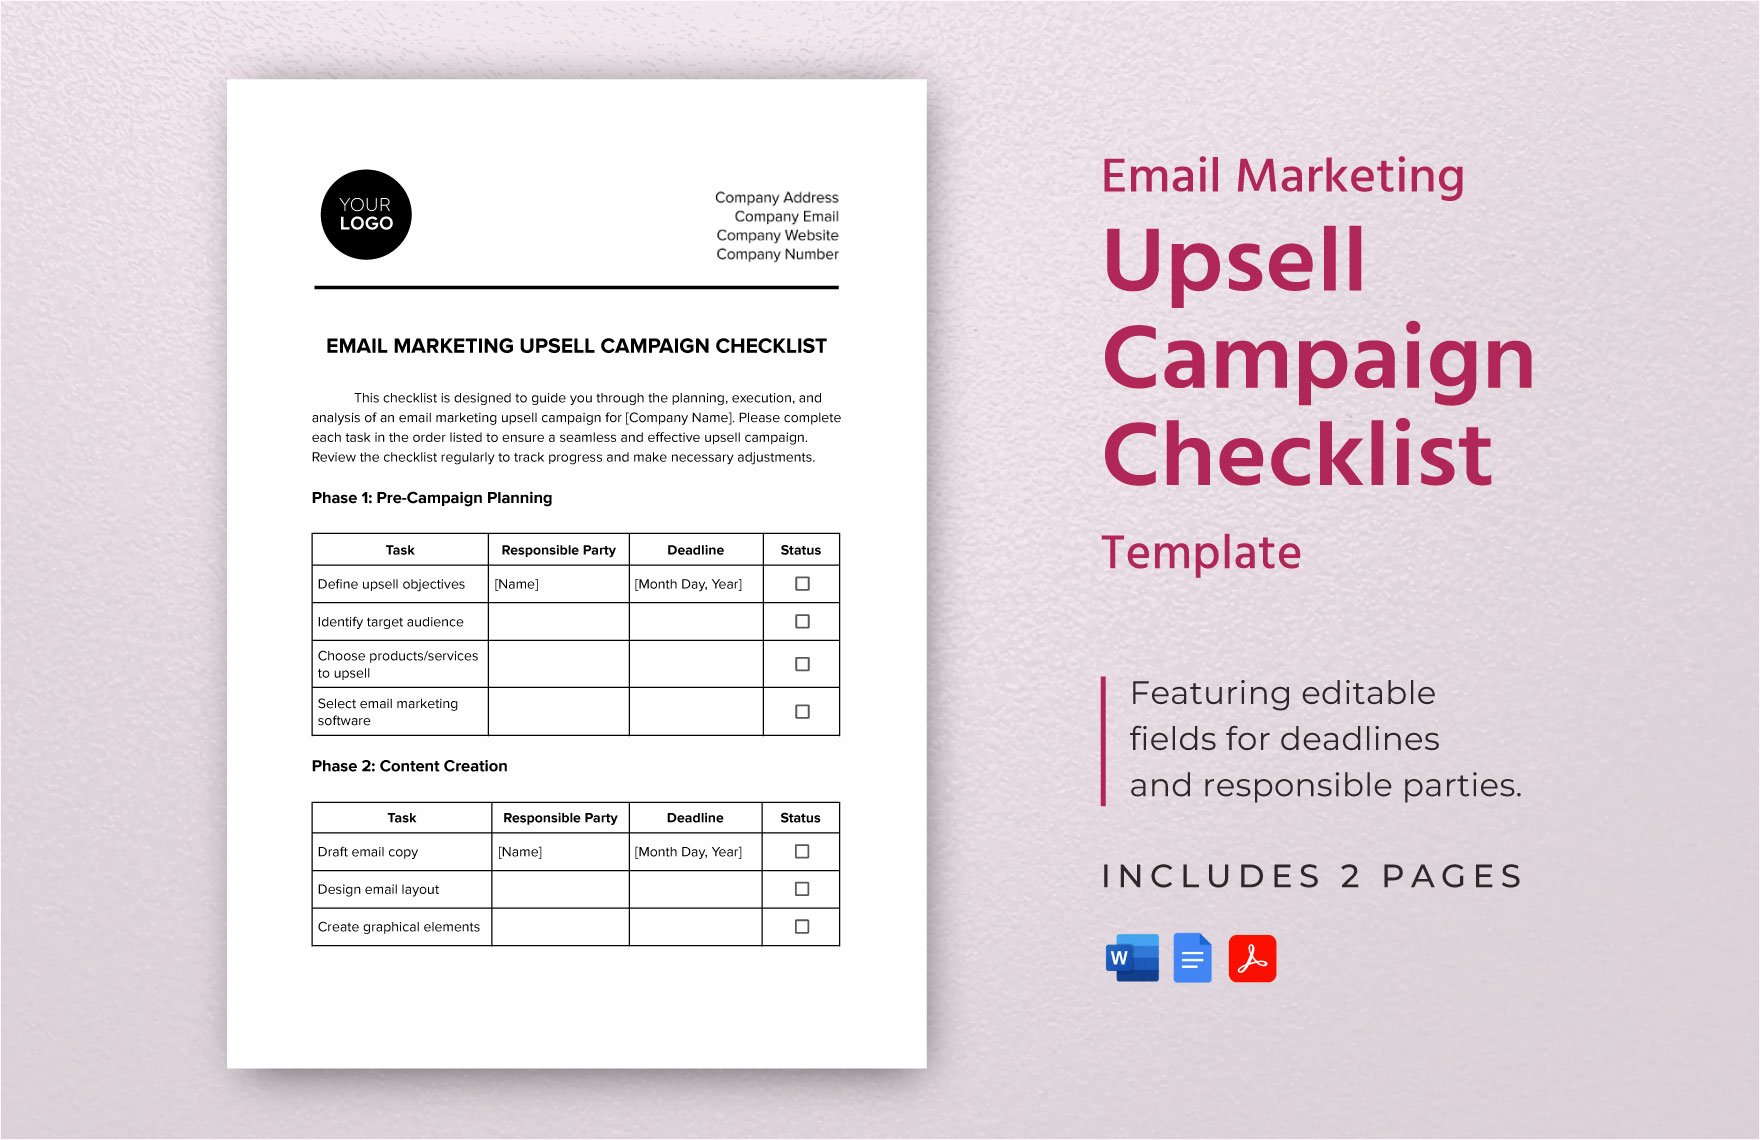 Email Marketing Upsell Campaign Checklist Template